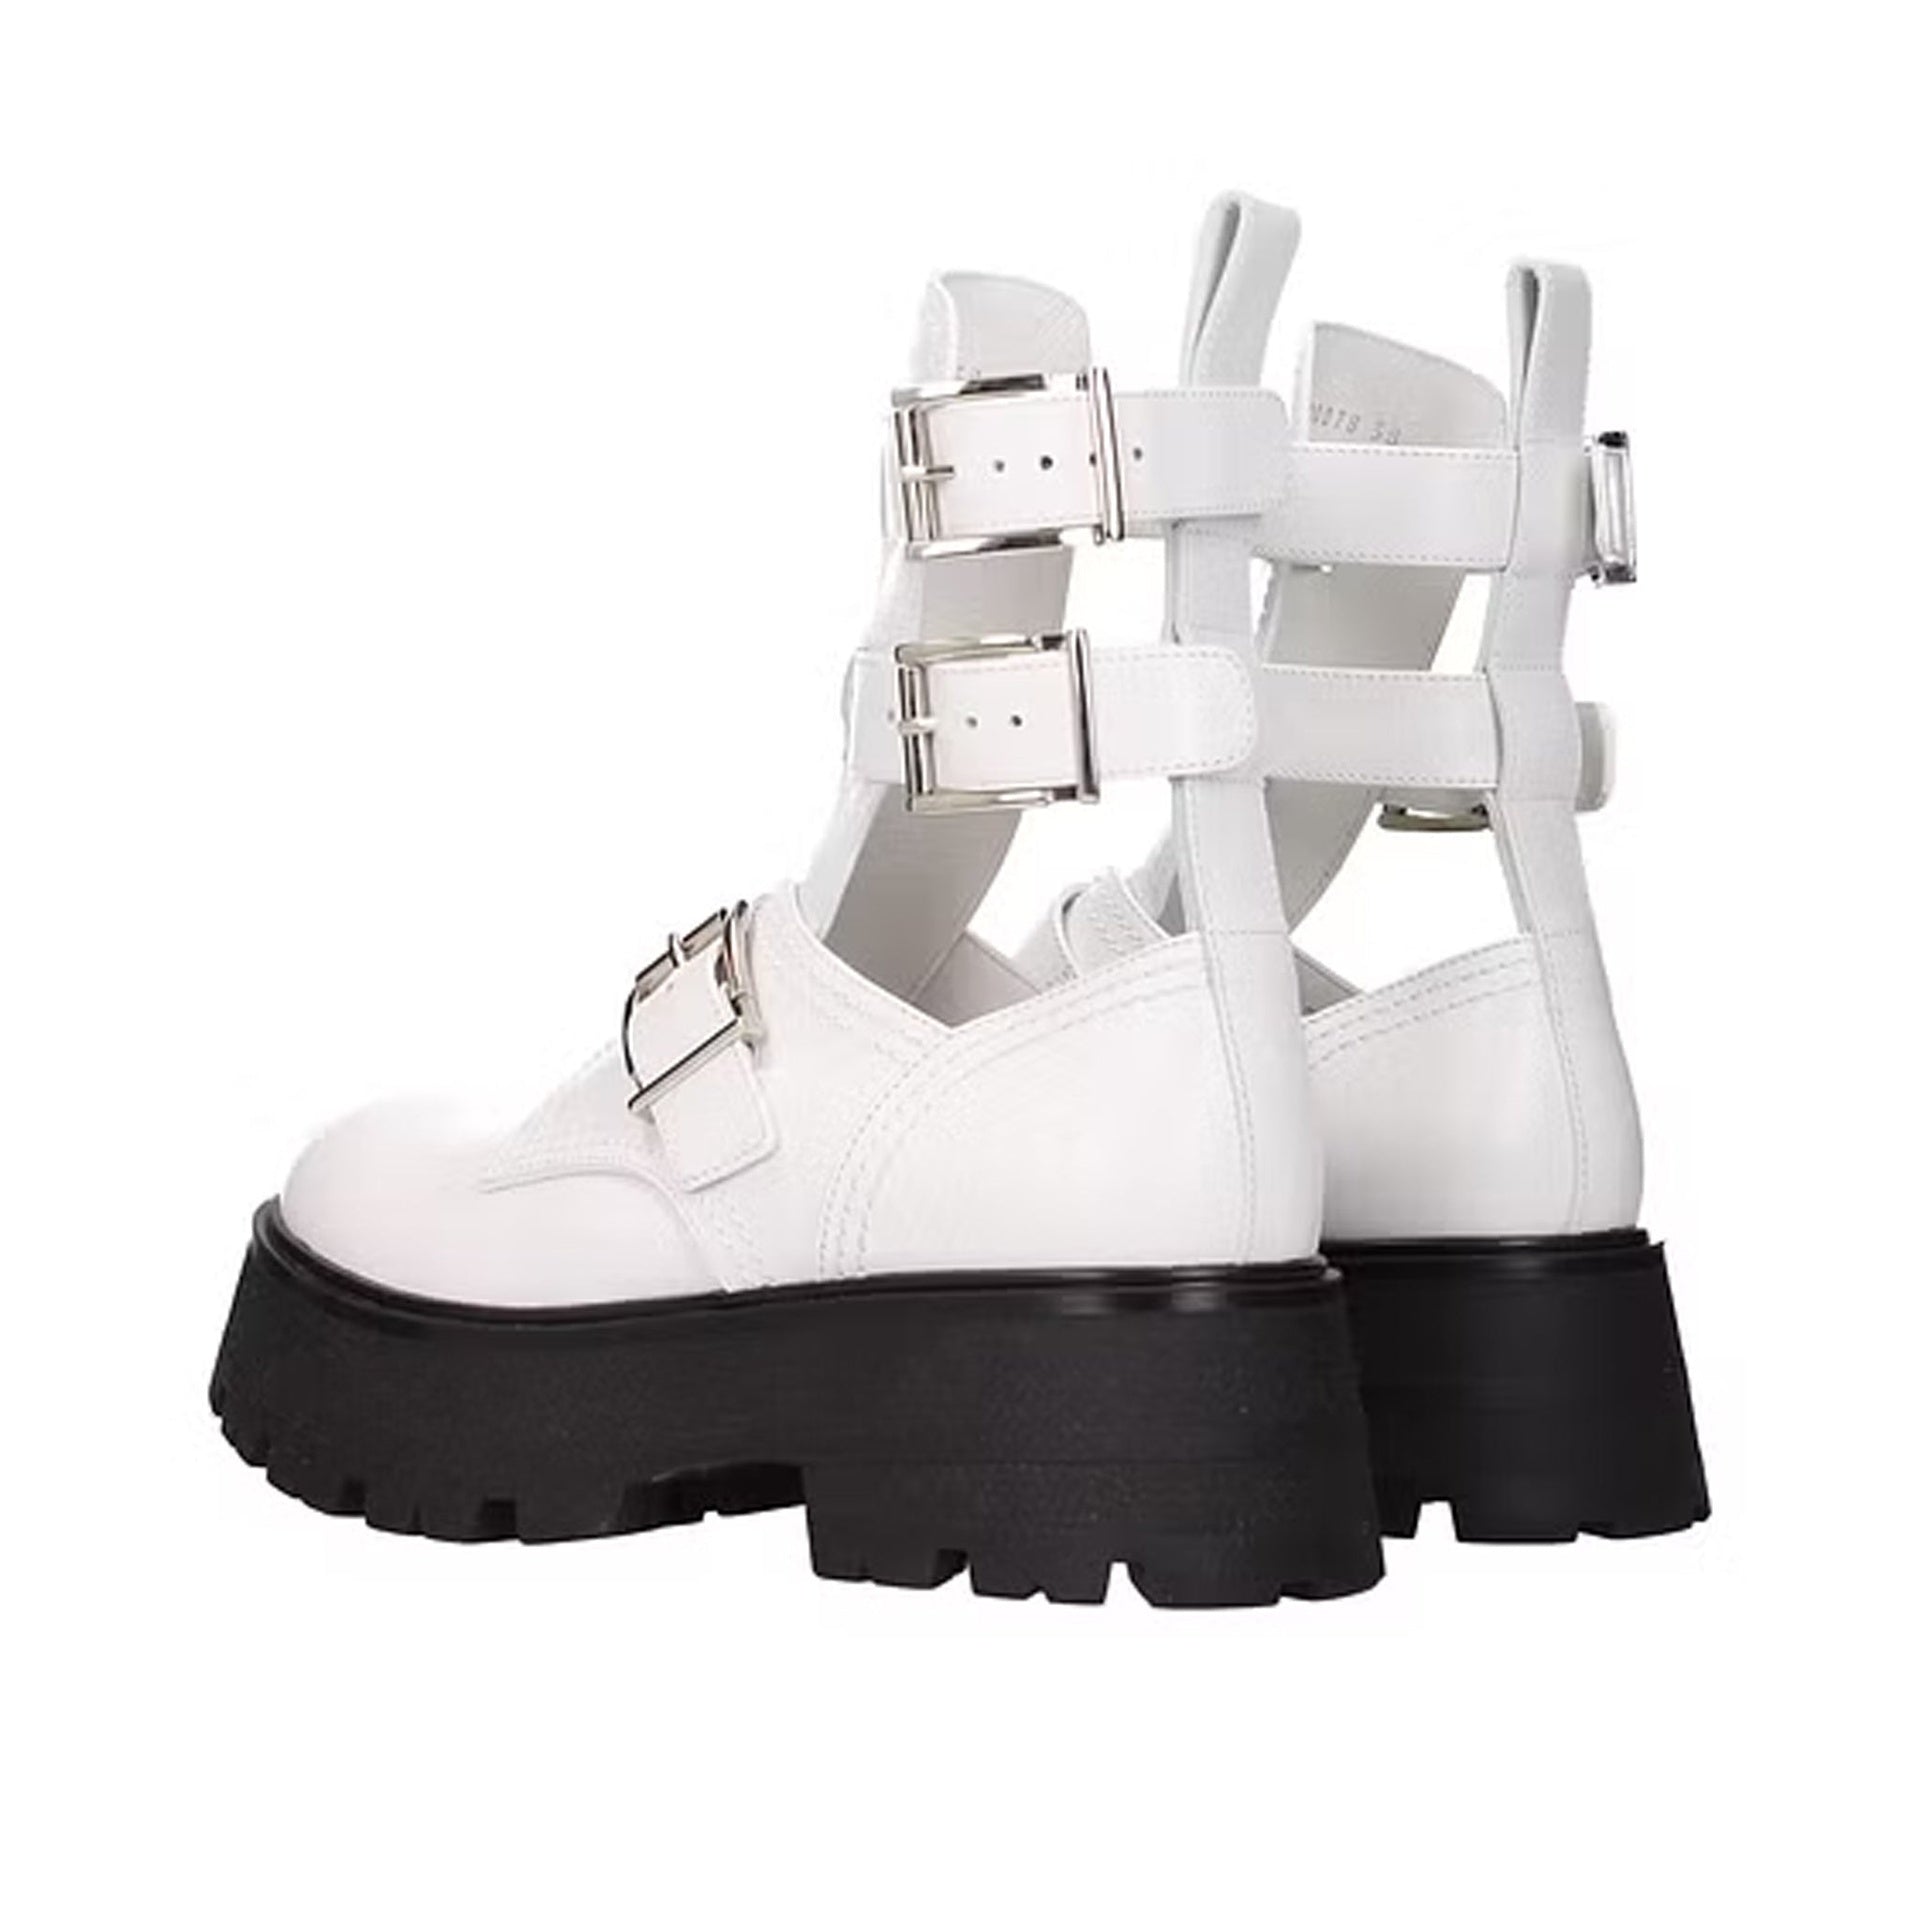 ALEXANDER-MCQUEEN-OUTLET-SALE-Alexander-Mcqueen-Leather-Ankle-Boots-Stiefel-Stiefeletten-WHITE-37_5-ARCHIVE-COLLECTION-3.jpg